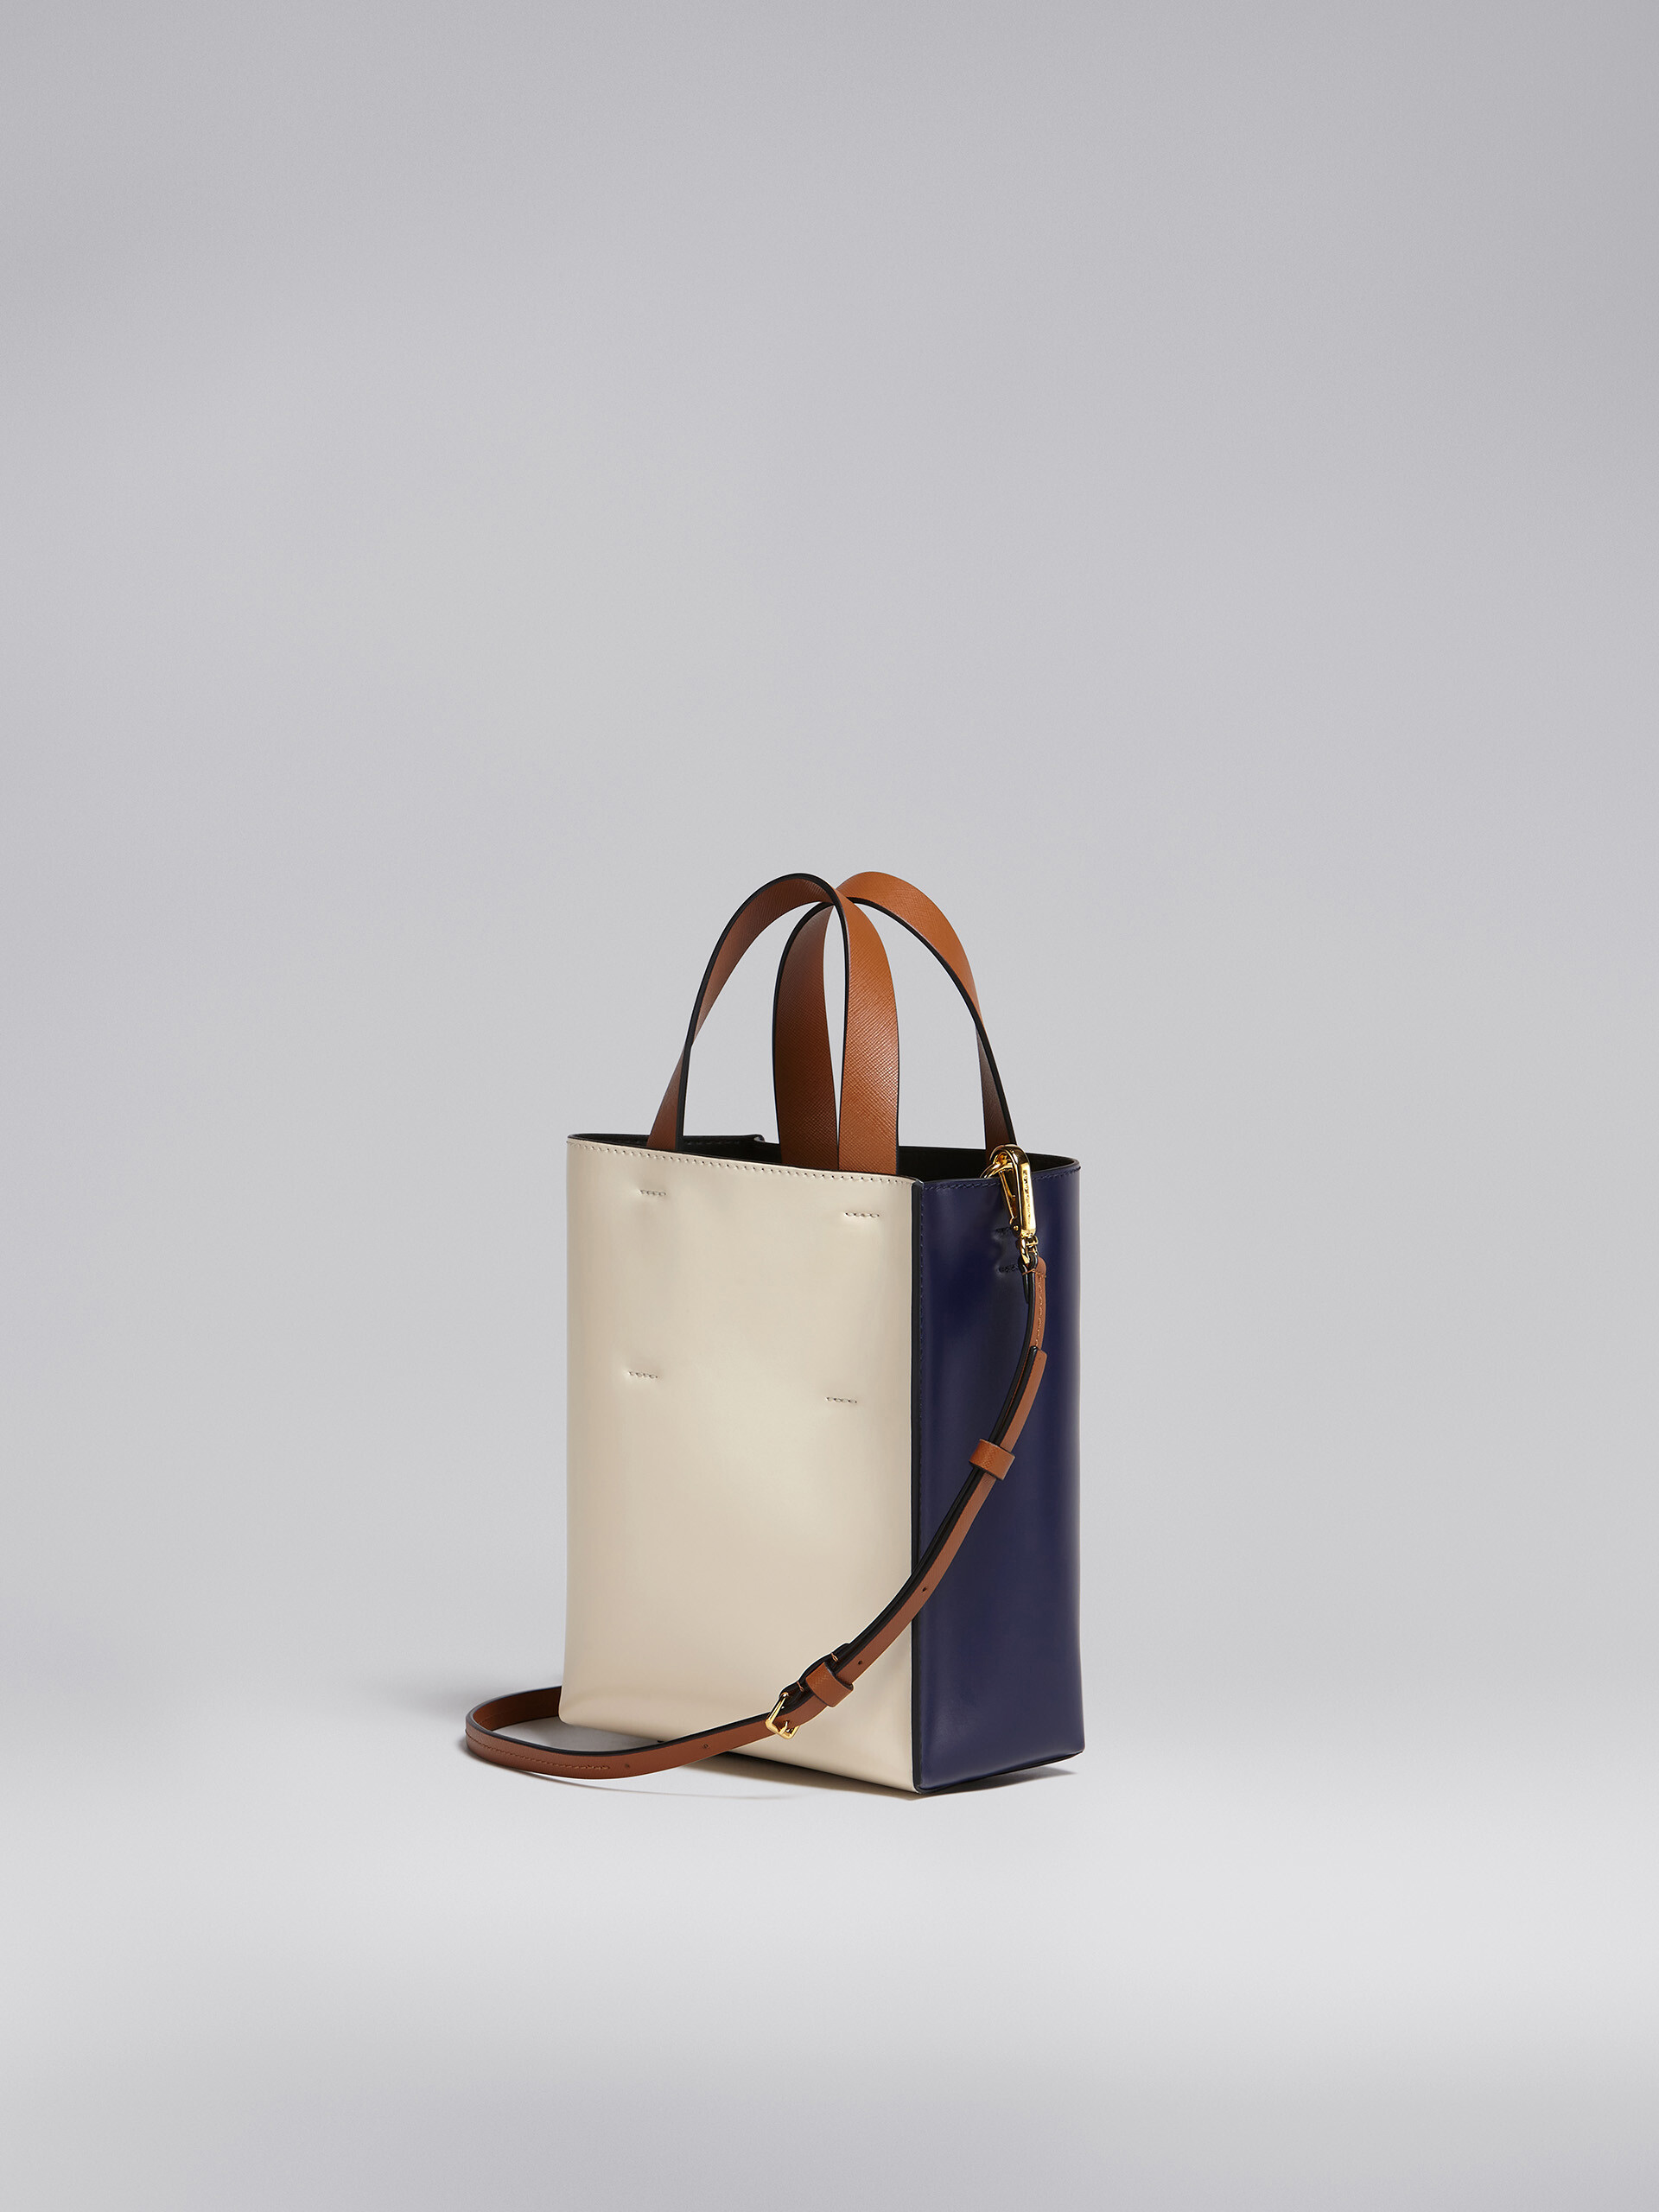 MUSEO mini bag in blue and white leather - Shopping Bags - Image 3